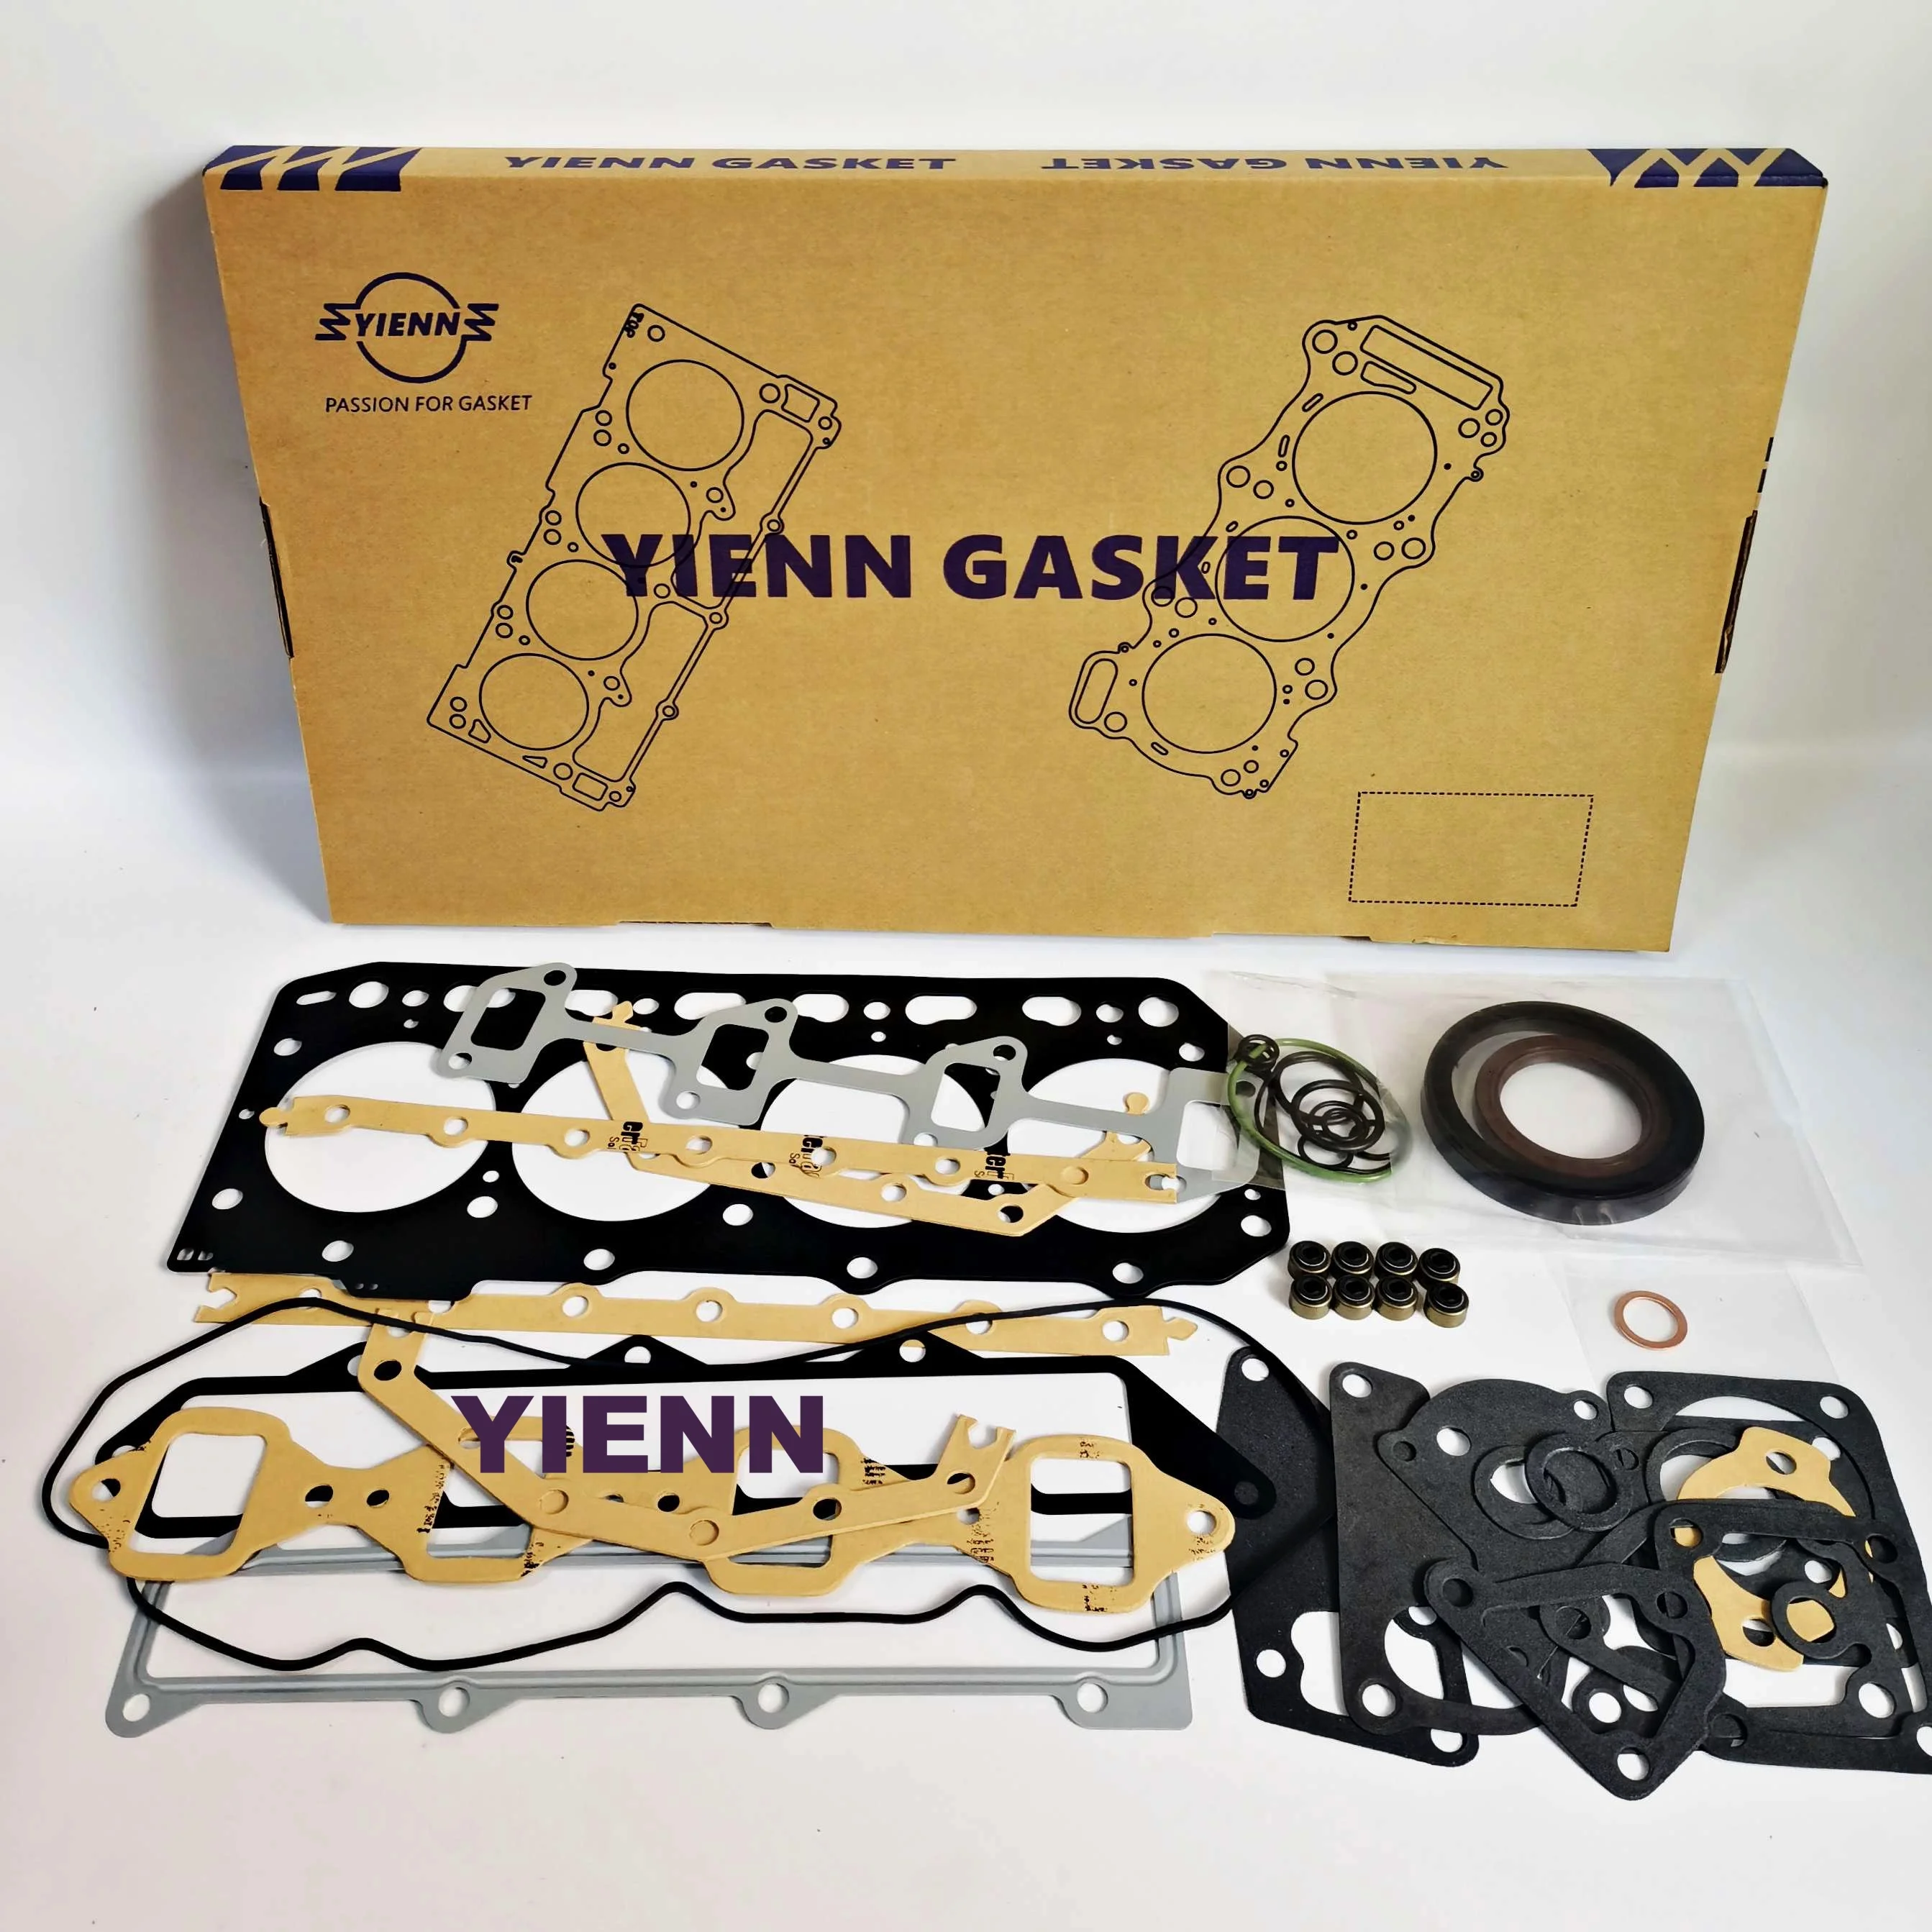 

4D88-6 4D88-3A Full Gasket Set Or Head Gasket For Komatsu Engine Parts Excavator PC30MR-3 PC40FR-1 PC50UU-2HW DITCH WITCH MX352